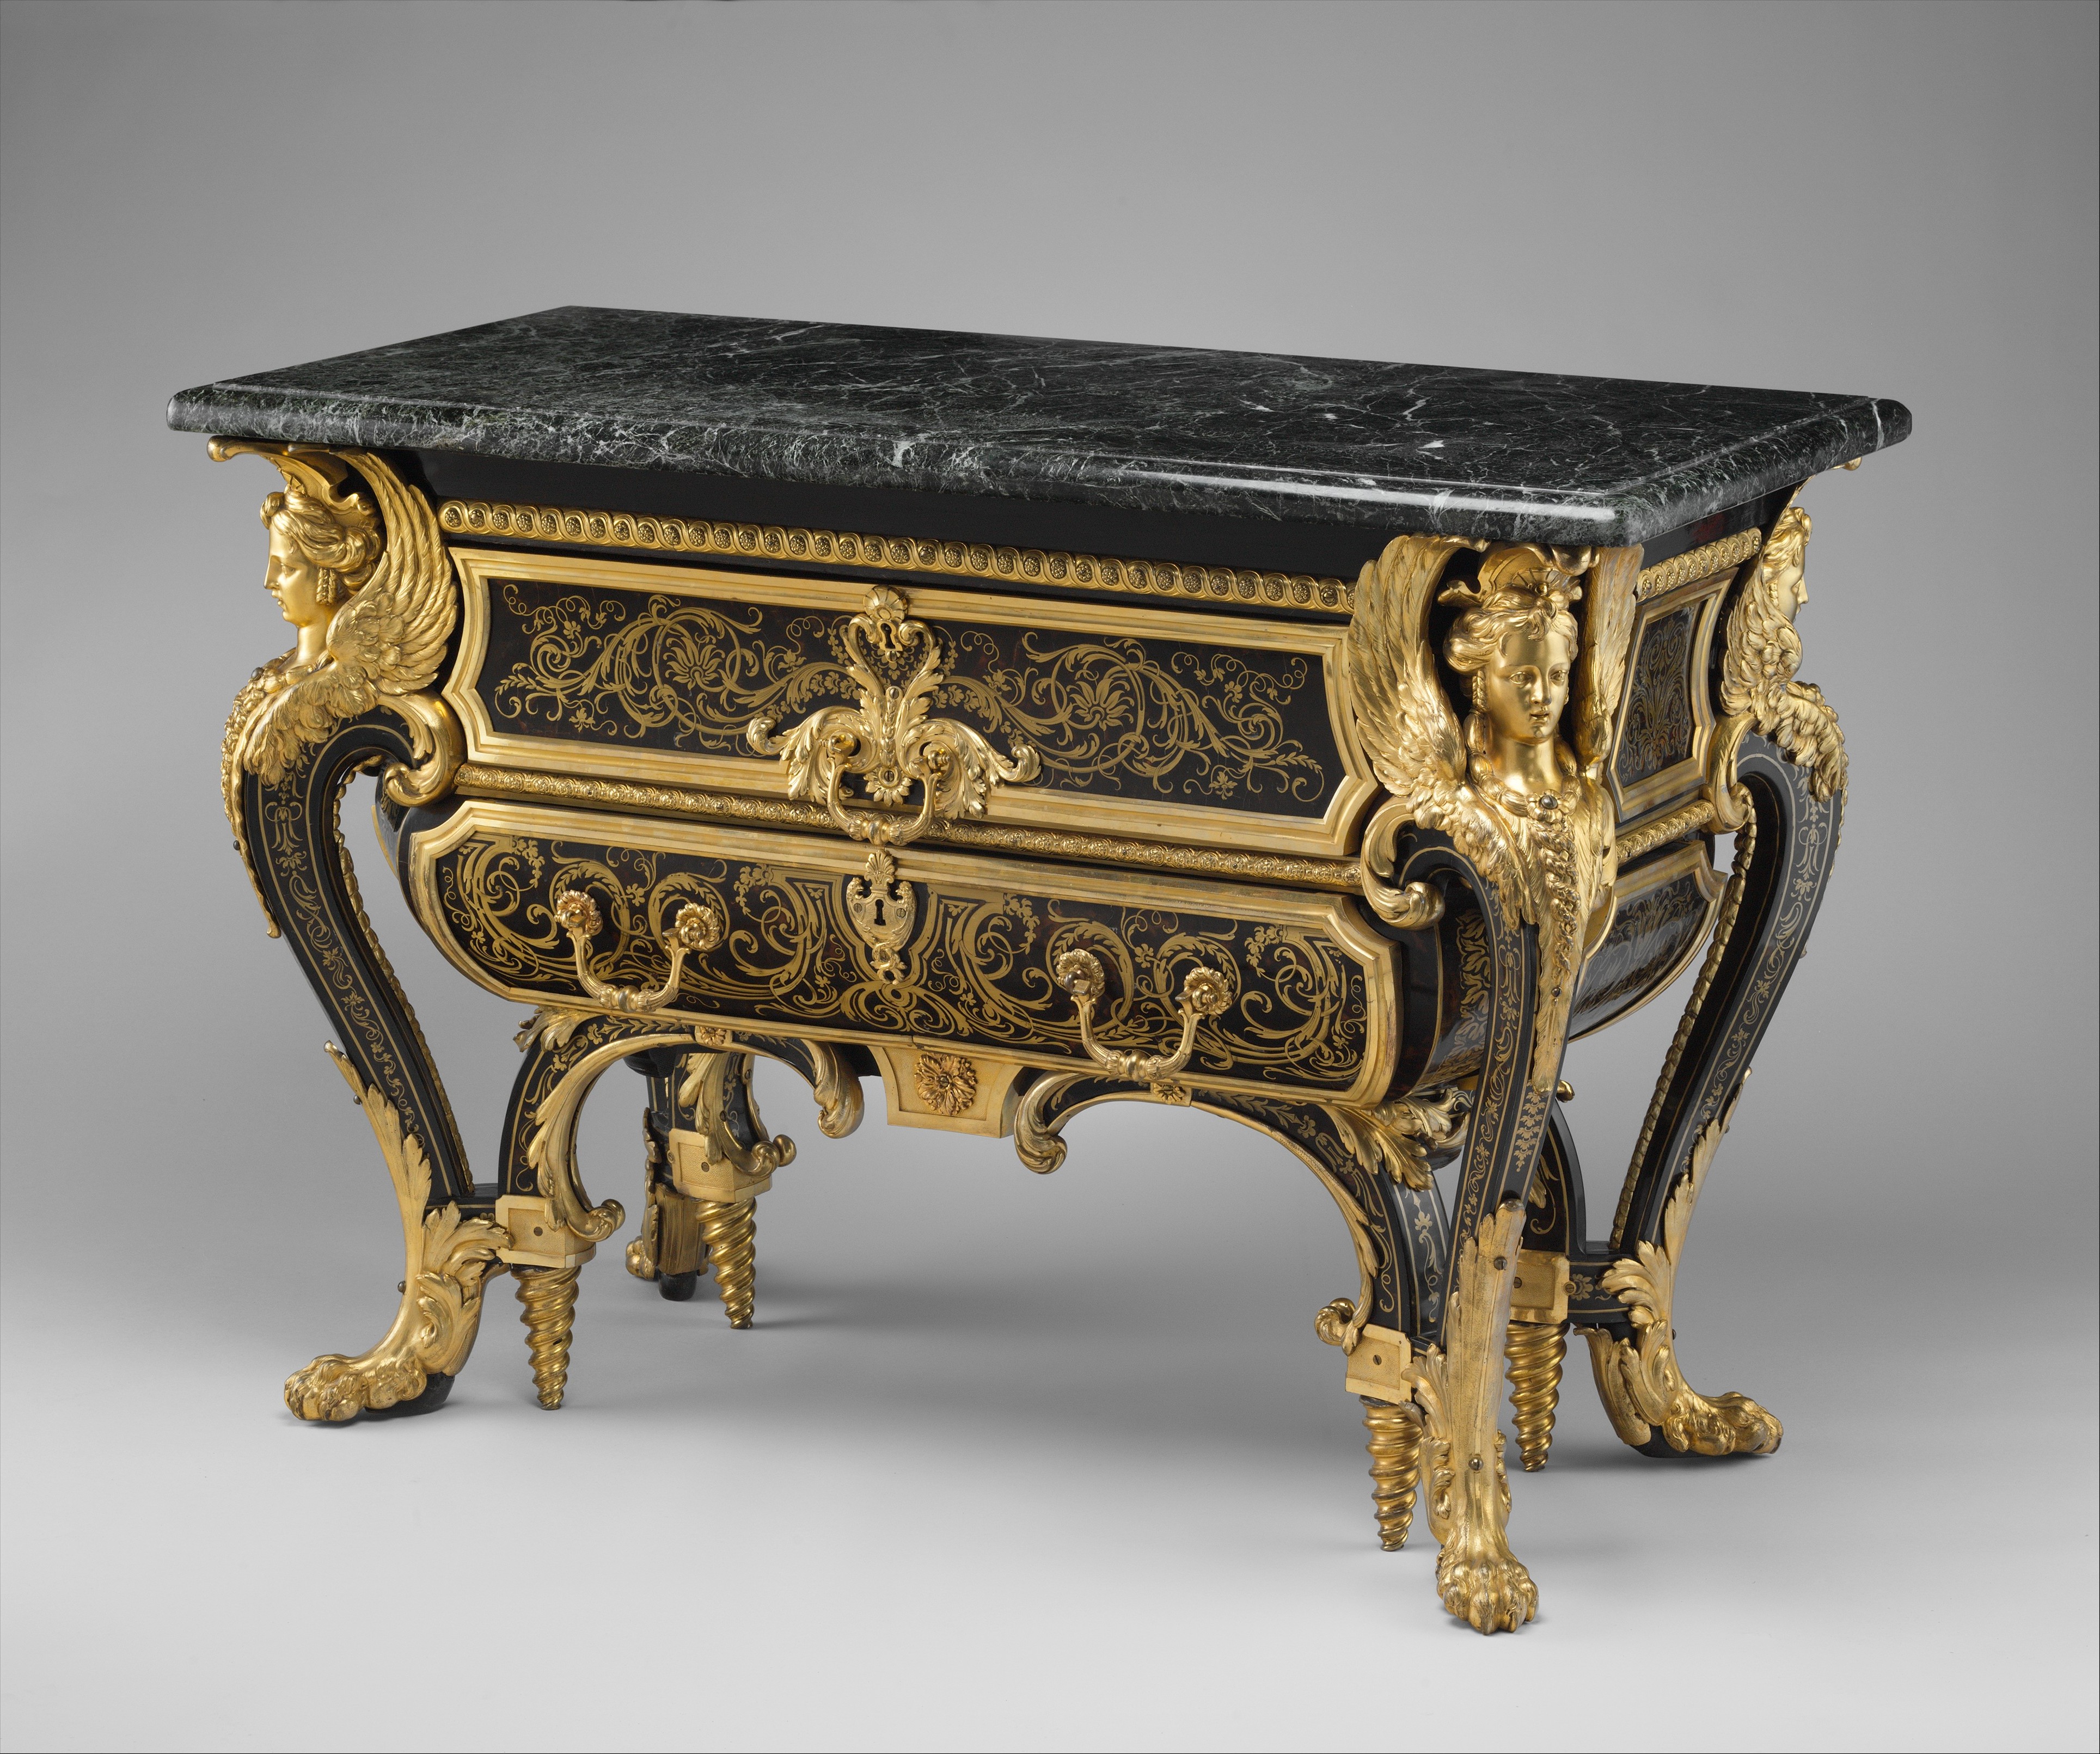 Comò Mazarine by André-Charles Boulle - 1708 - 87,6 × 128,3 × 62,9 cm 